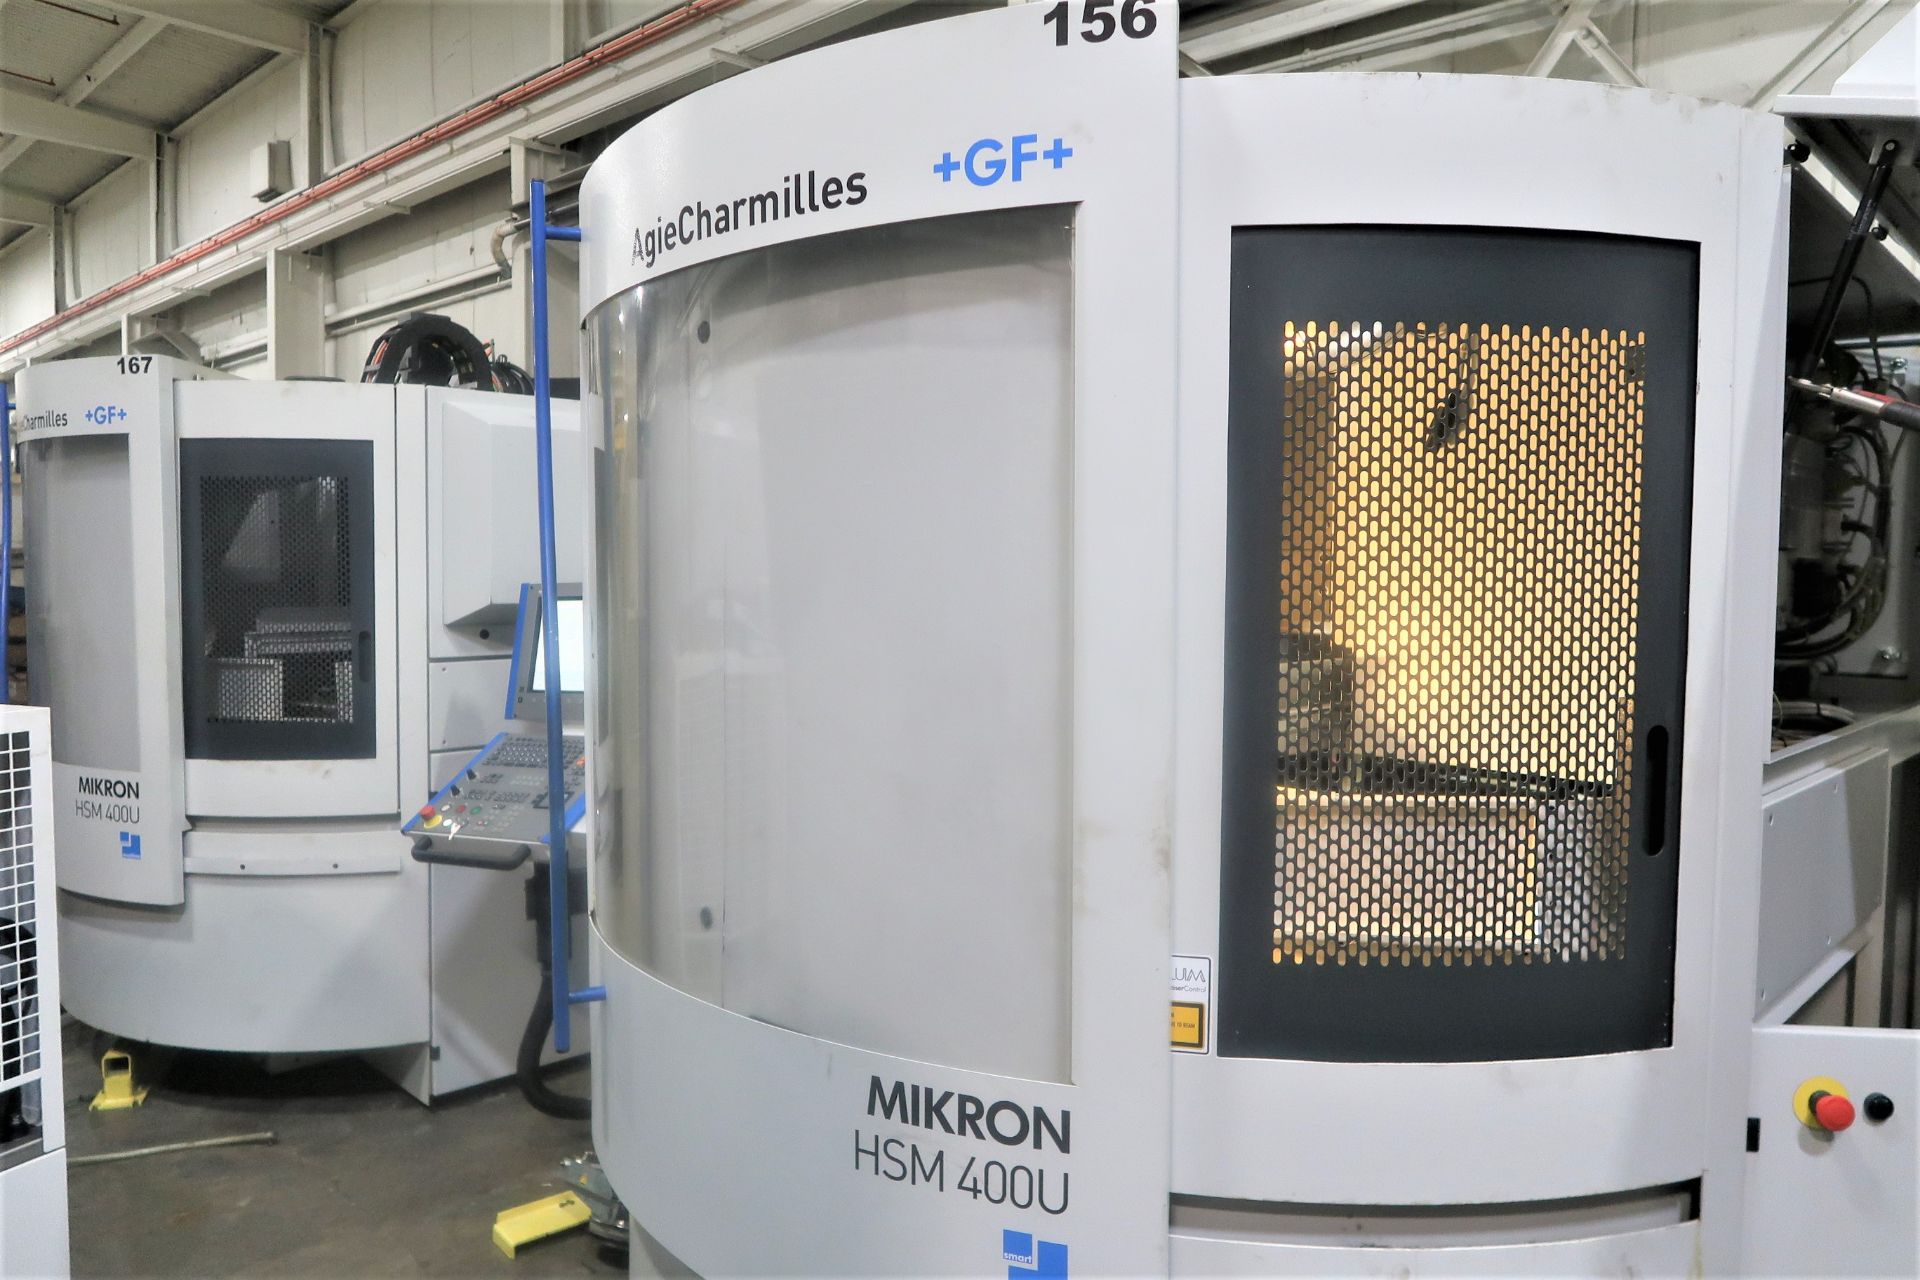 Mikron HSM-400U High Speed 5-Axis CNC Vertical Machining Center, S/N 107.87.00.156, New 2006 - Image 9 of 15